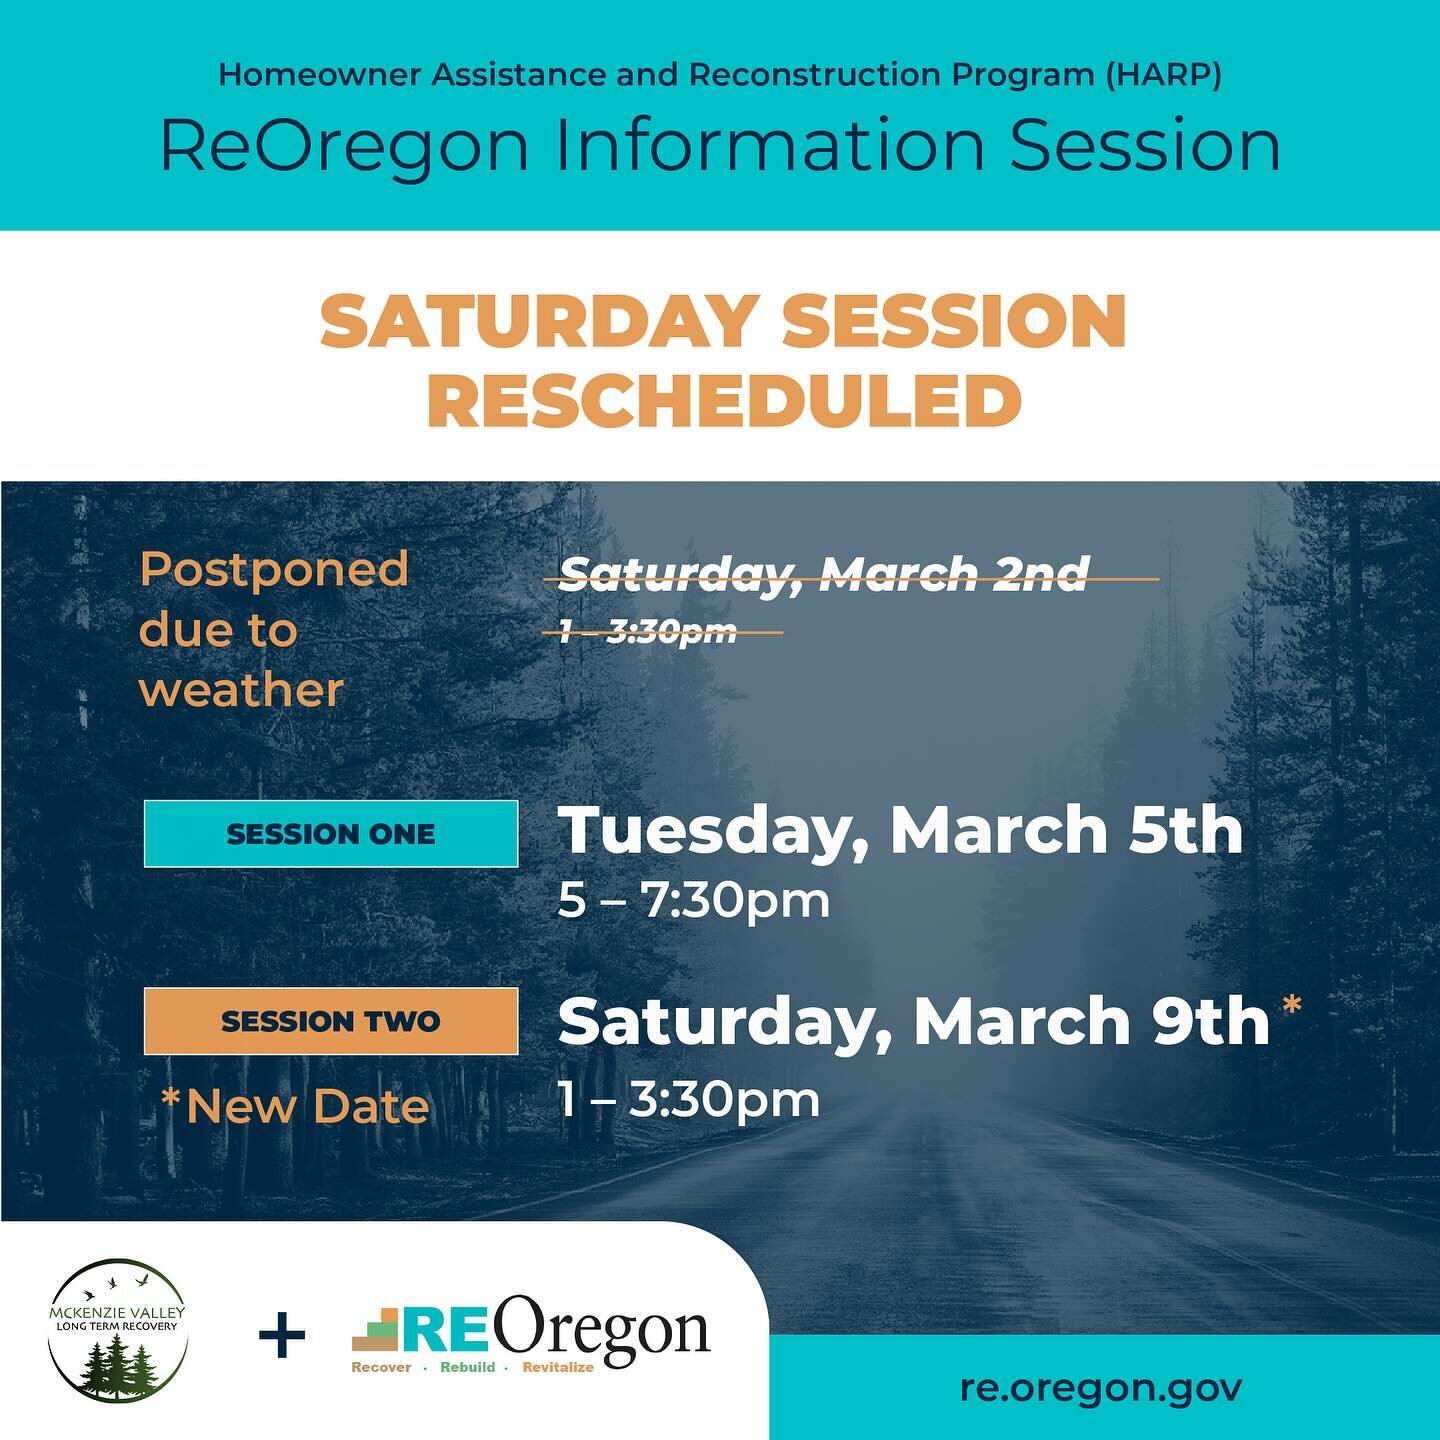 UPDATE:  Due to forecasted bad weather, this weekend&rsquo;s informational session is rescheduled for next Saturday, March 9th. Join us on either Tuesday, March 5th (5-7:30pm) or Saturday, March 9th (1-3:30pm) for the same invaluable insights about R